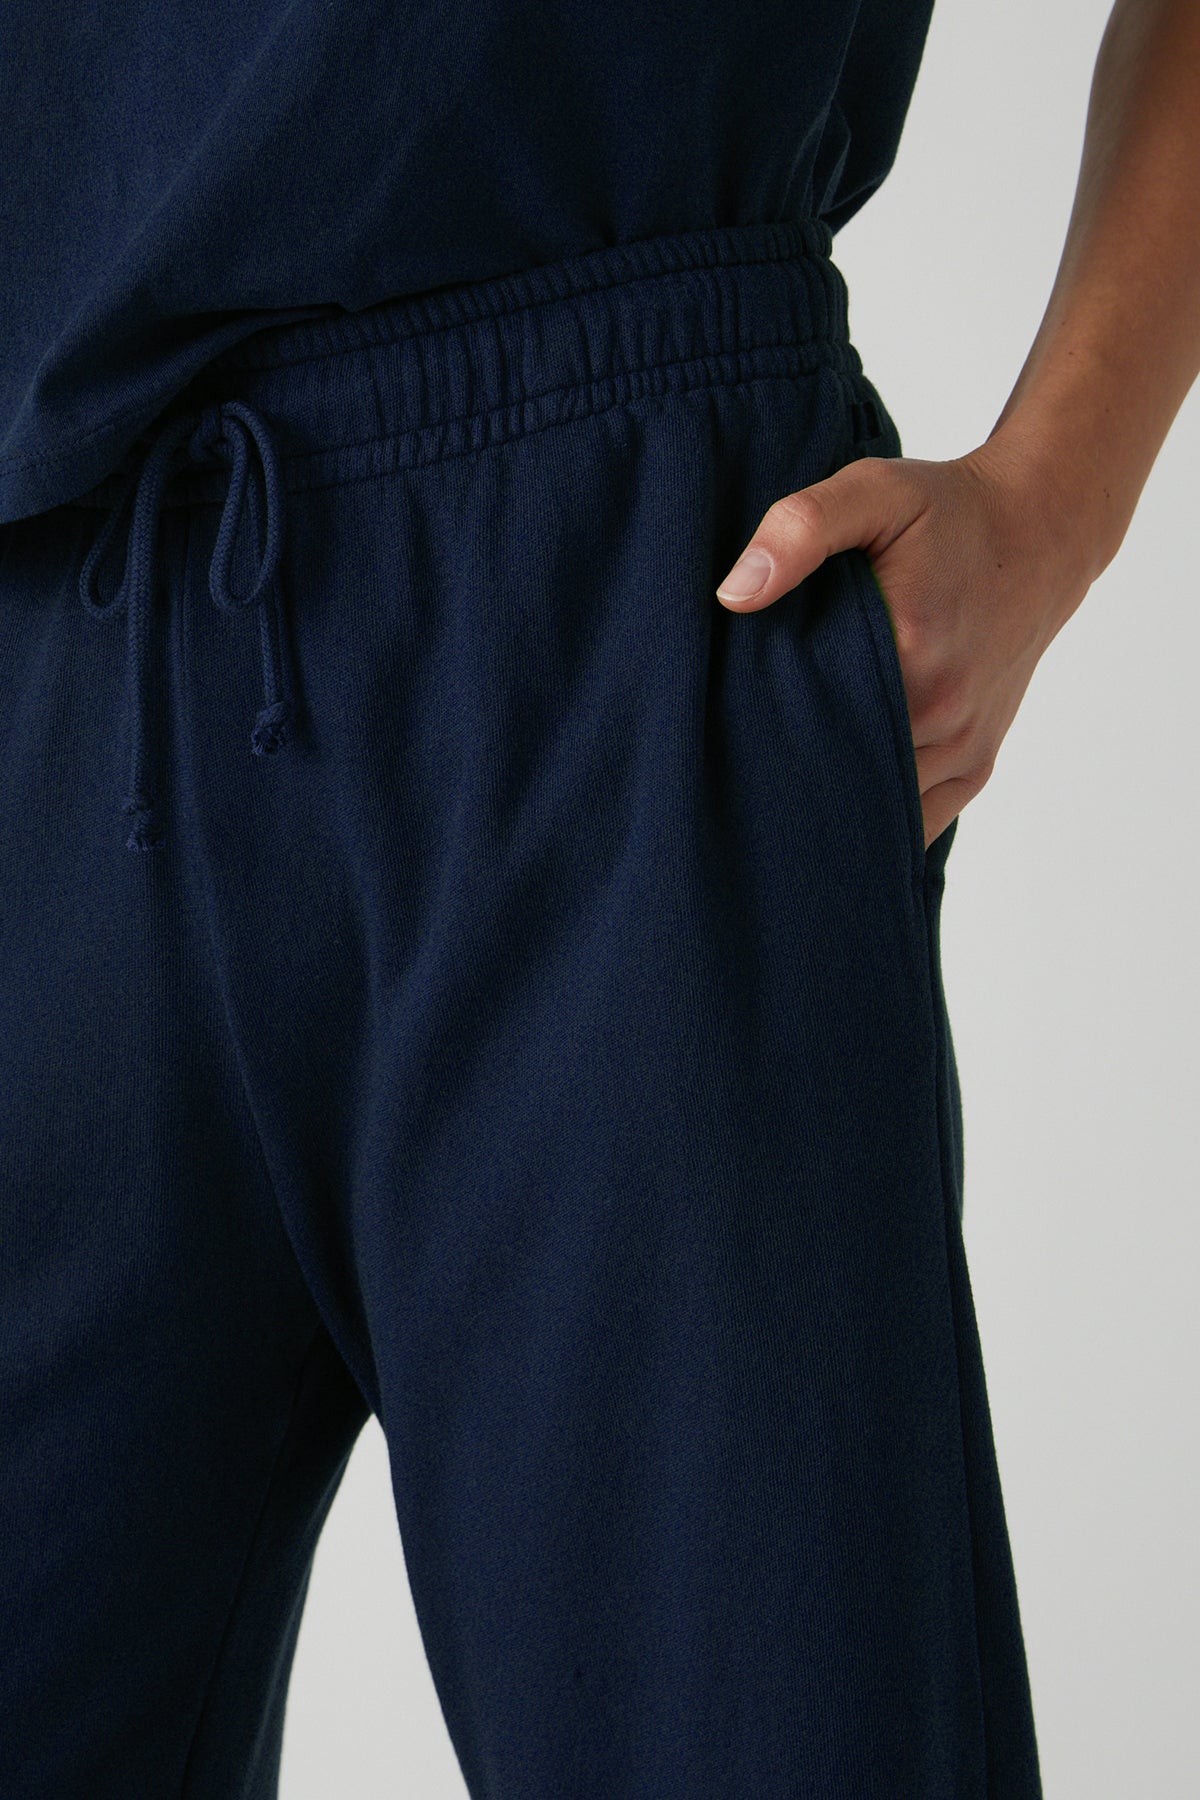 Montecito Sweatpant in Navy detail with model's hand in pocket-26458695827649